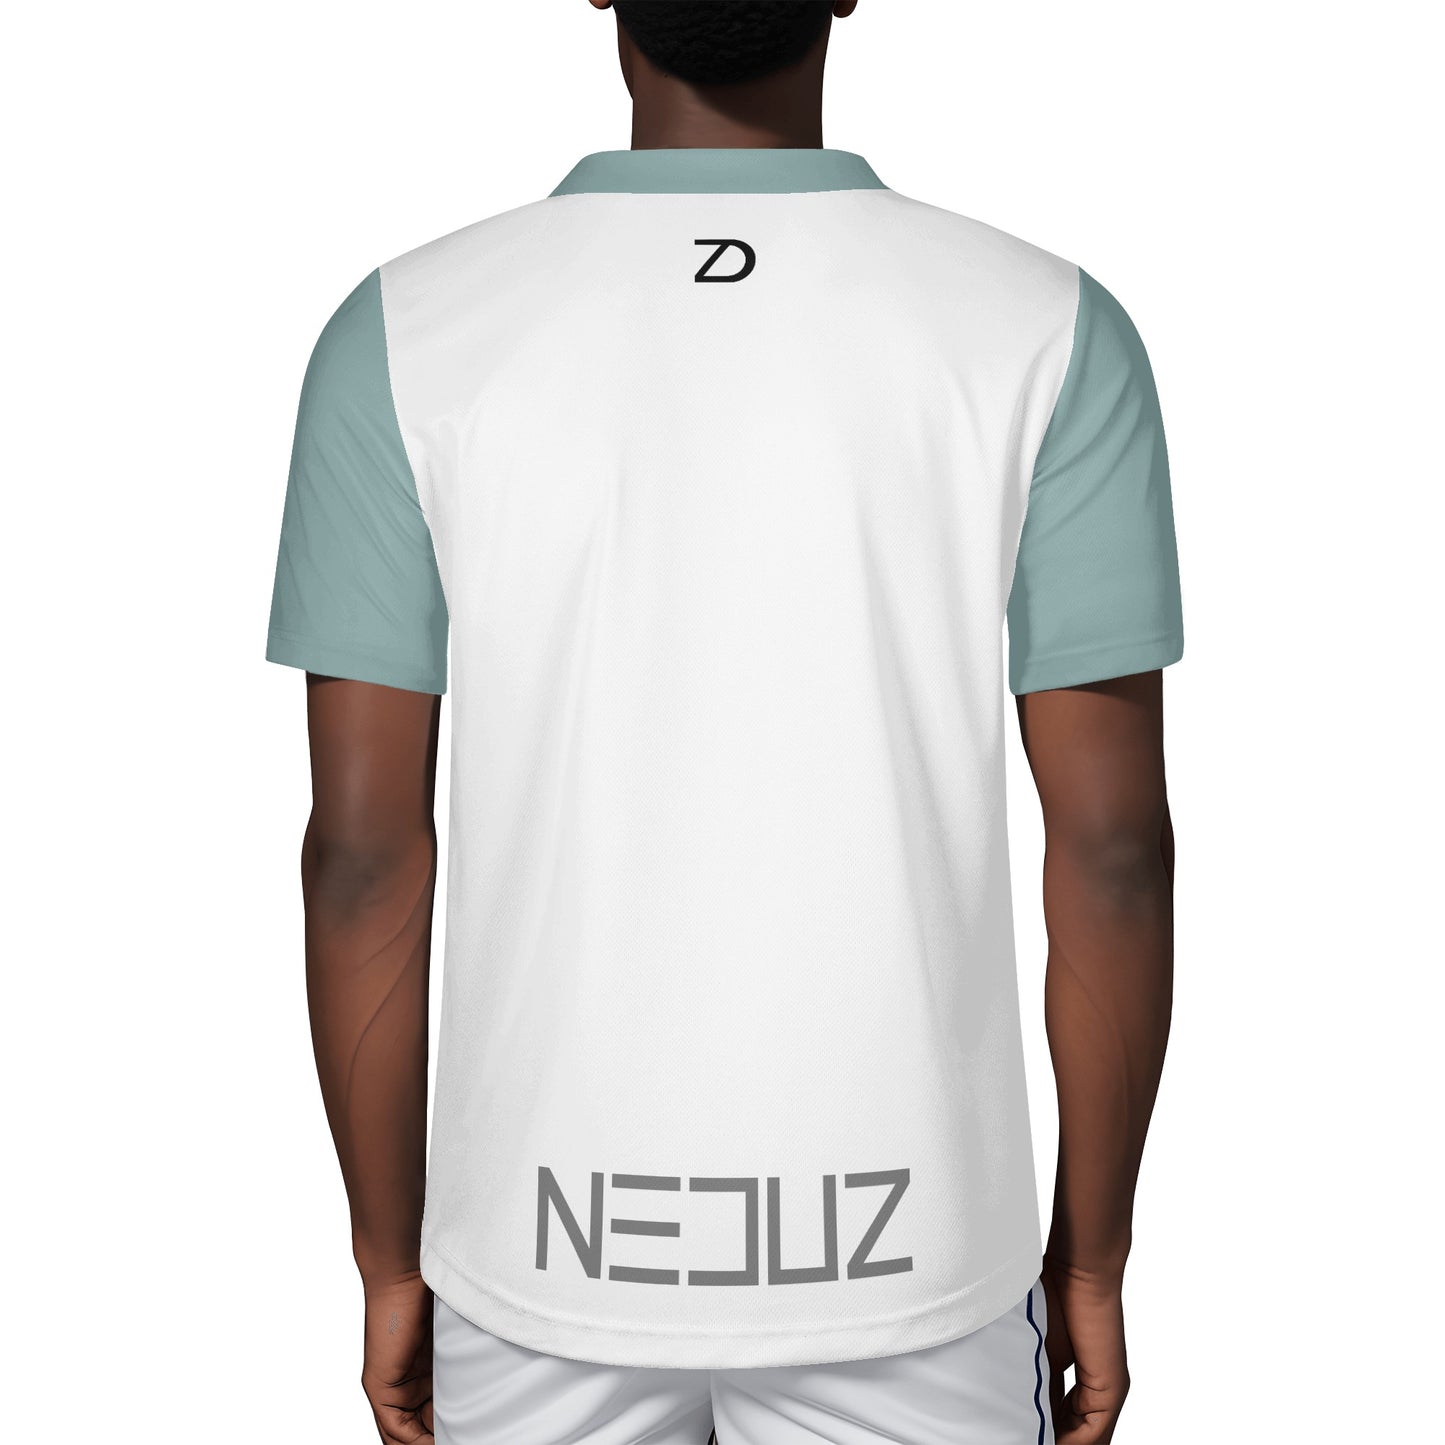 Neduz Mens Superpower Rugby Jersey - Breathable, Lightweight, Mesh Fabric, V-Neck